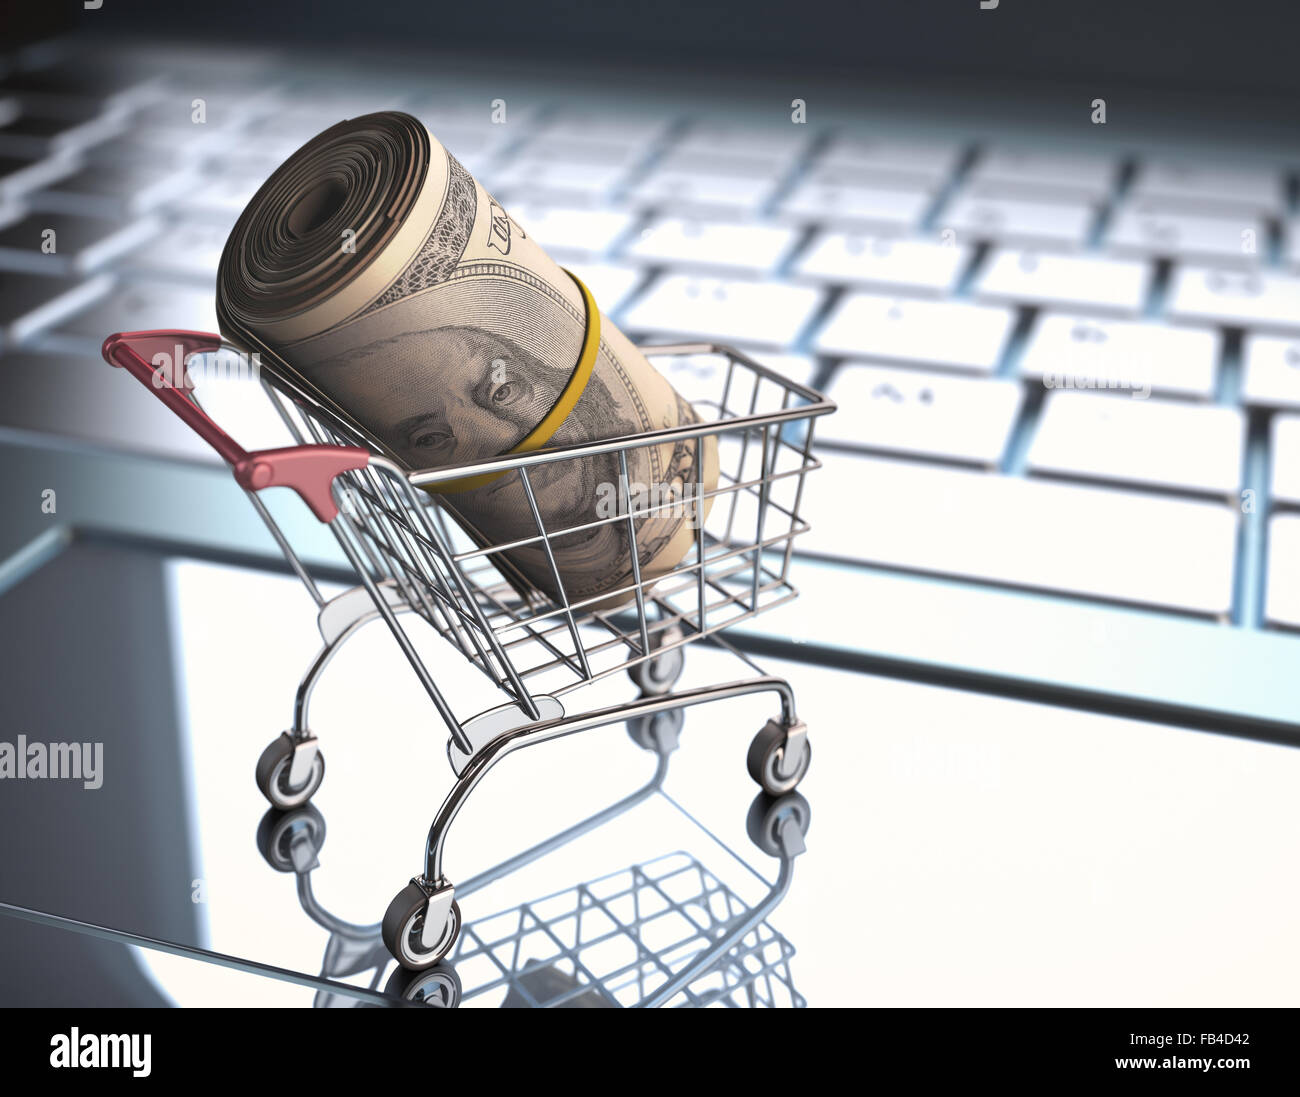 A roll of dollar bills in a shopping cart over a laptop keyboard. Stock Photo